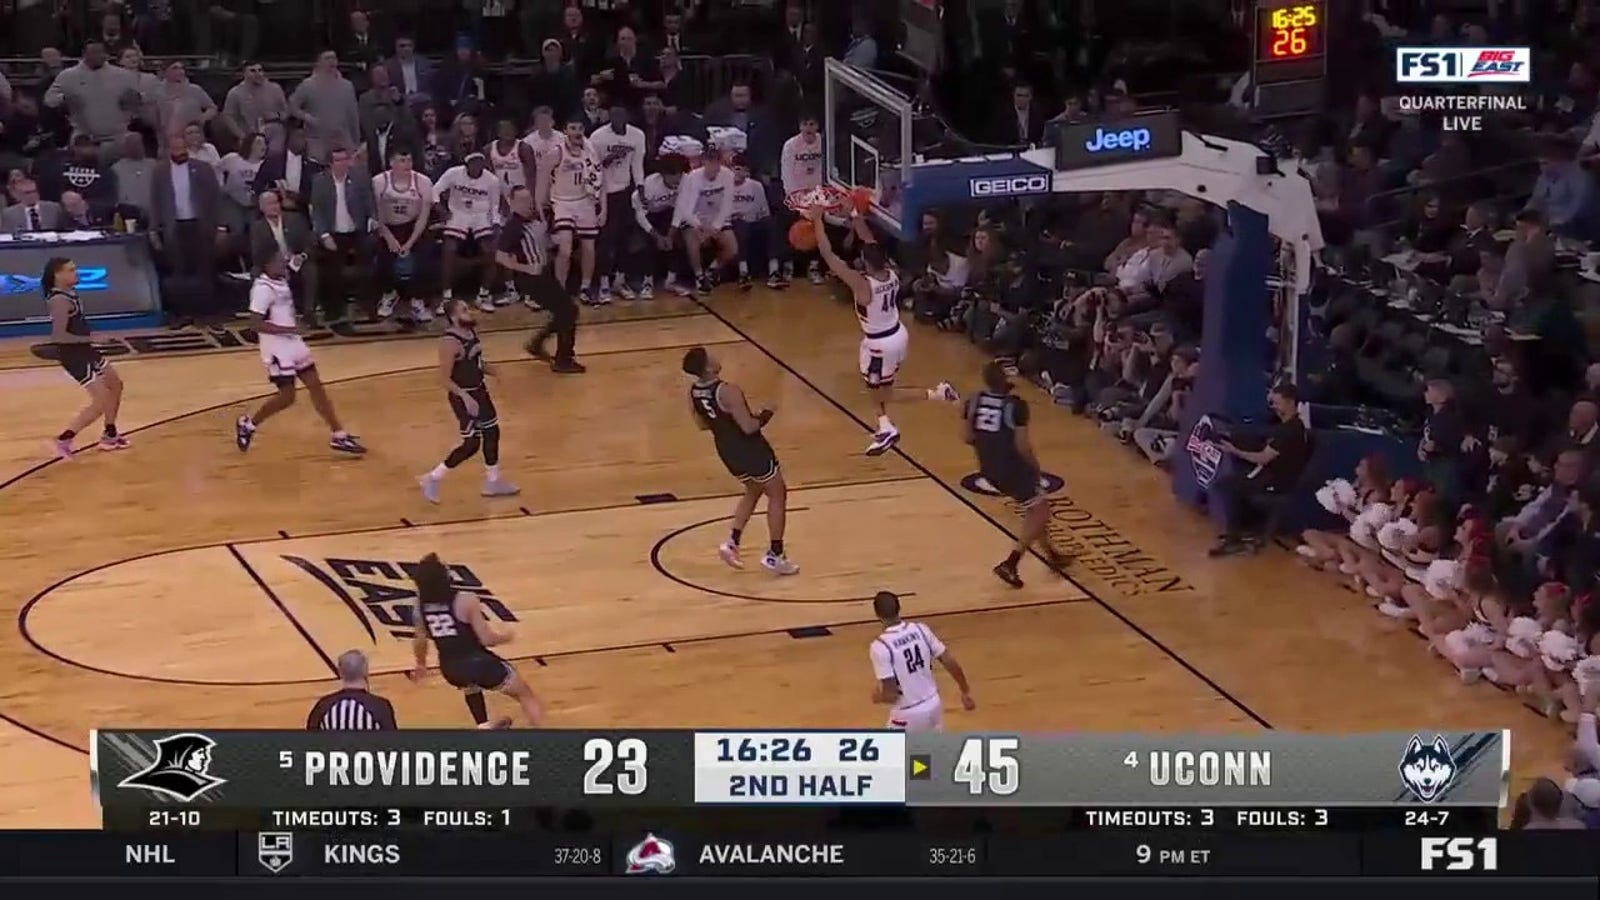 UConn gets out in transition, Andre Jackson Jr. throws down BEAUTIFUL jam